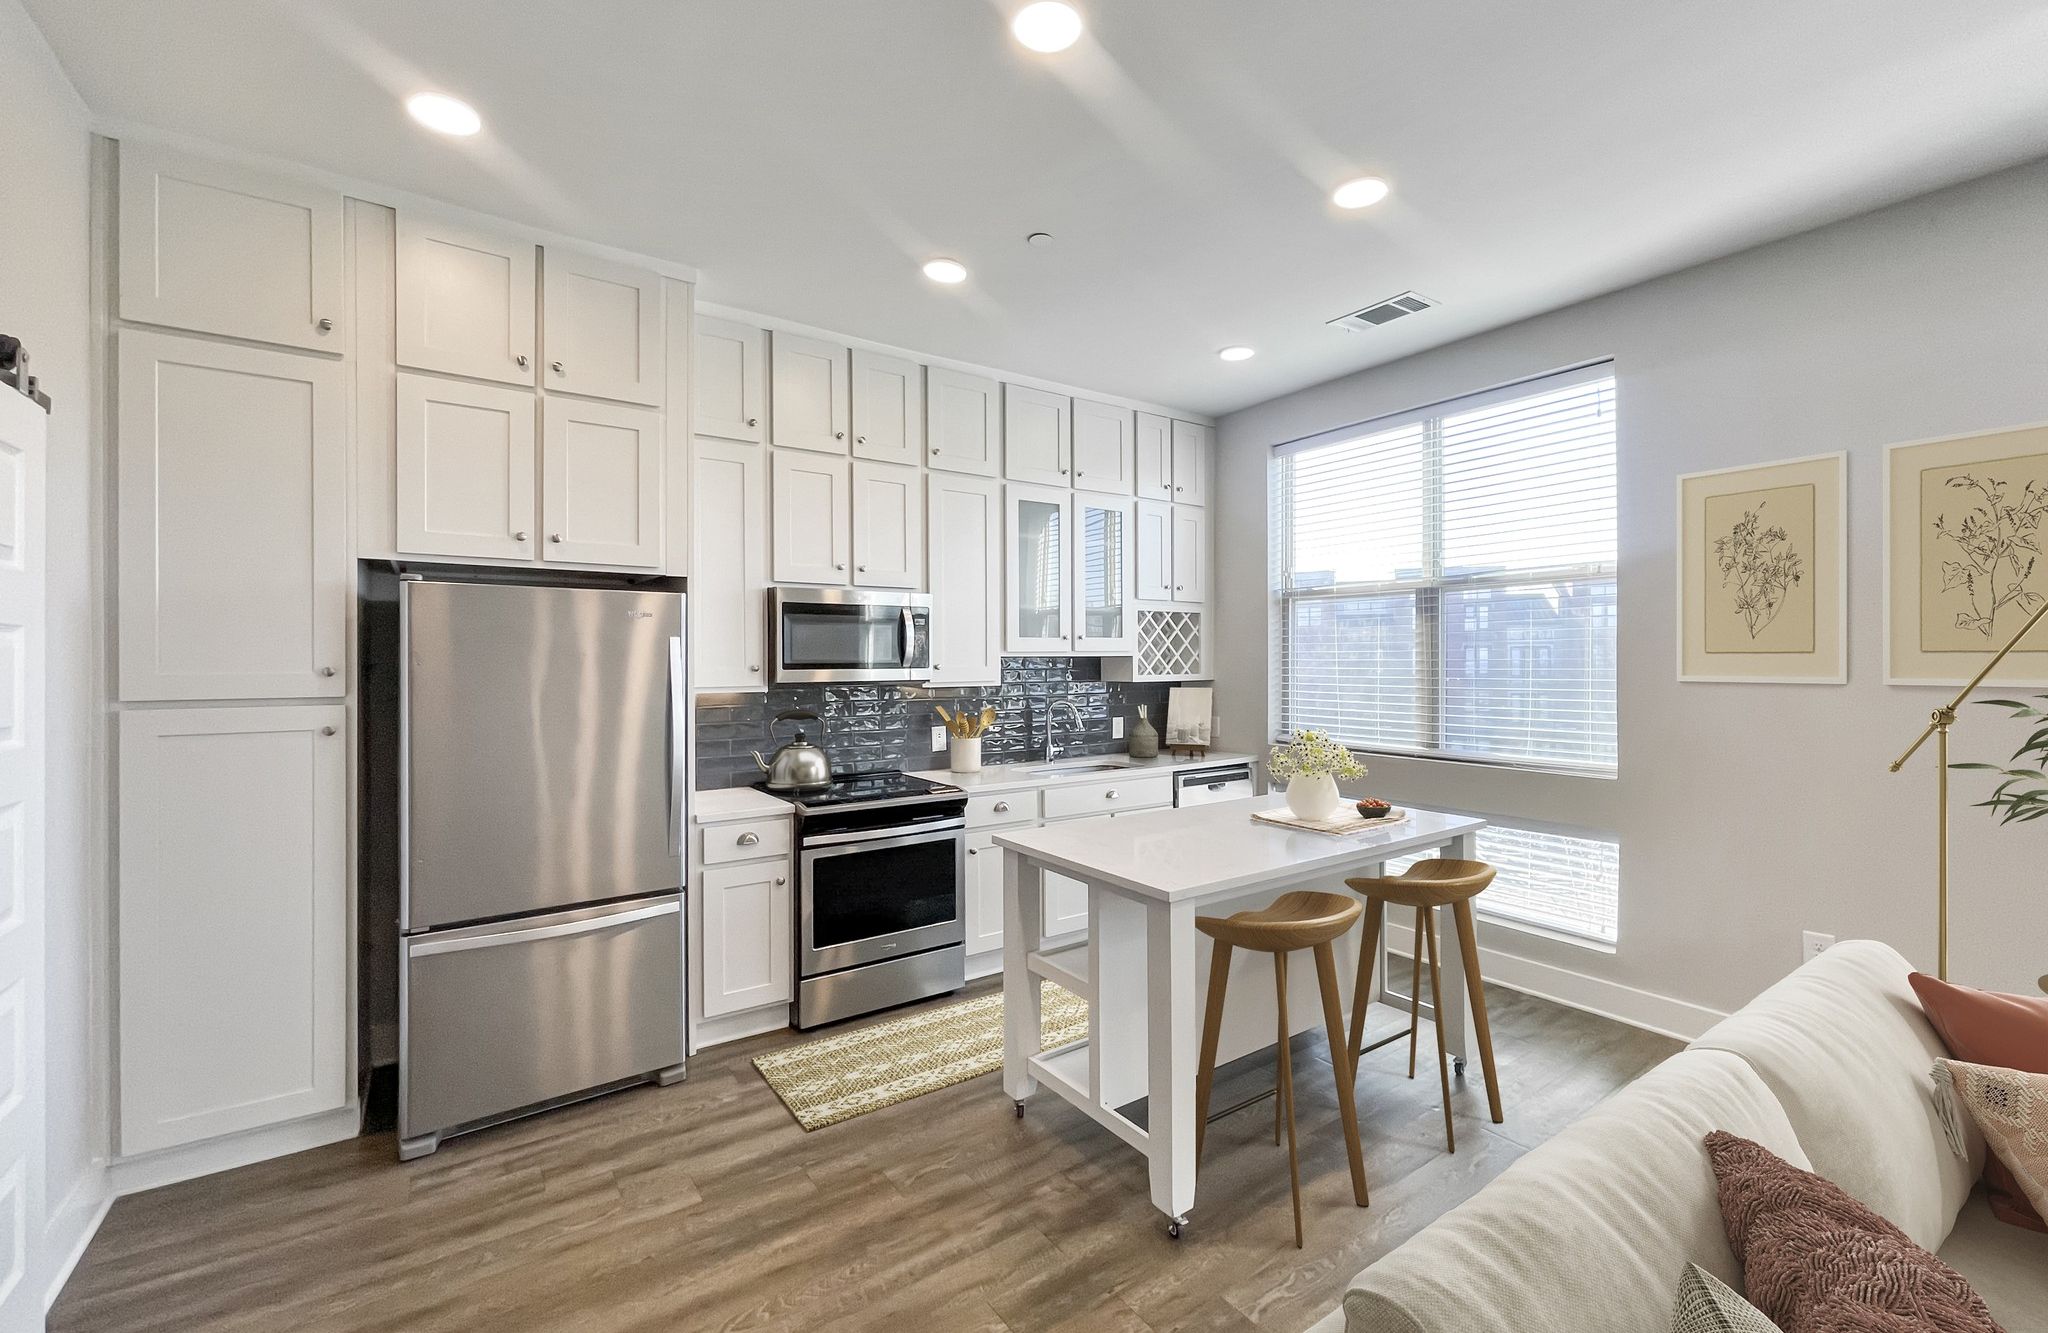 Studio apartment kitchen with floor-to-ceiling cabinets, stainless steel appliances, and floating island